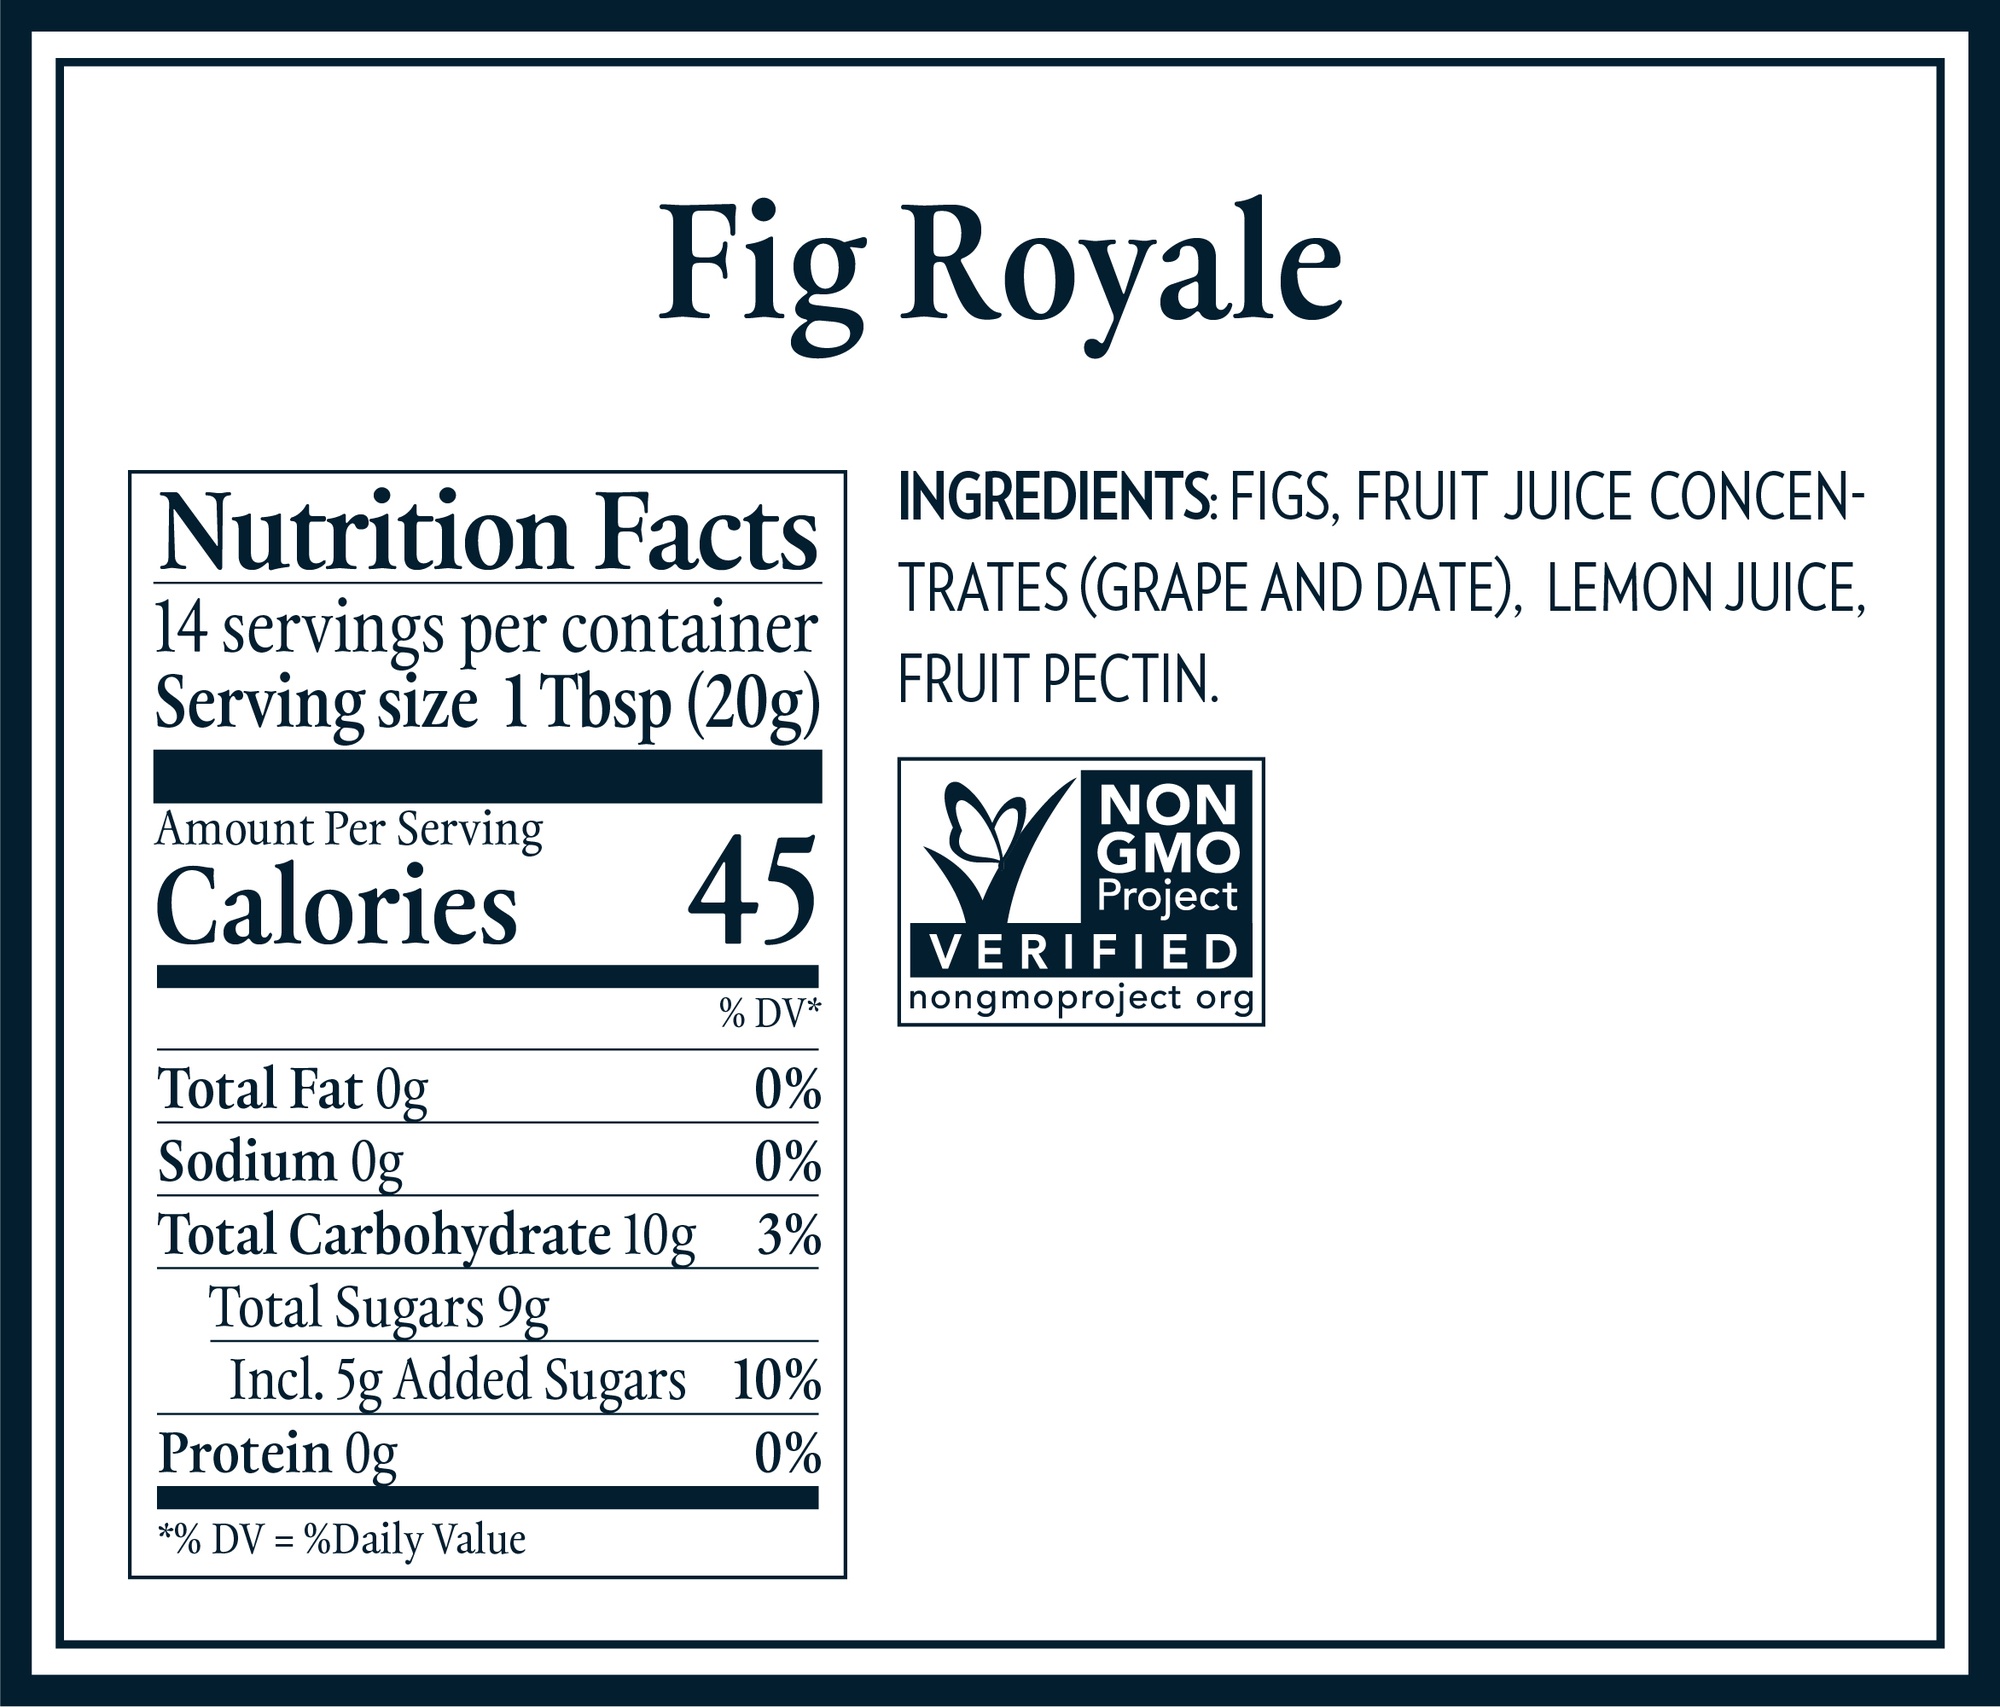 Nutrition Tables & Ingredients_fig royale